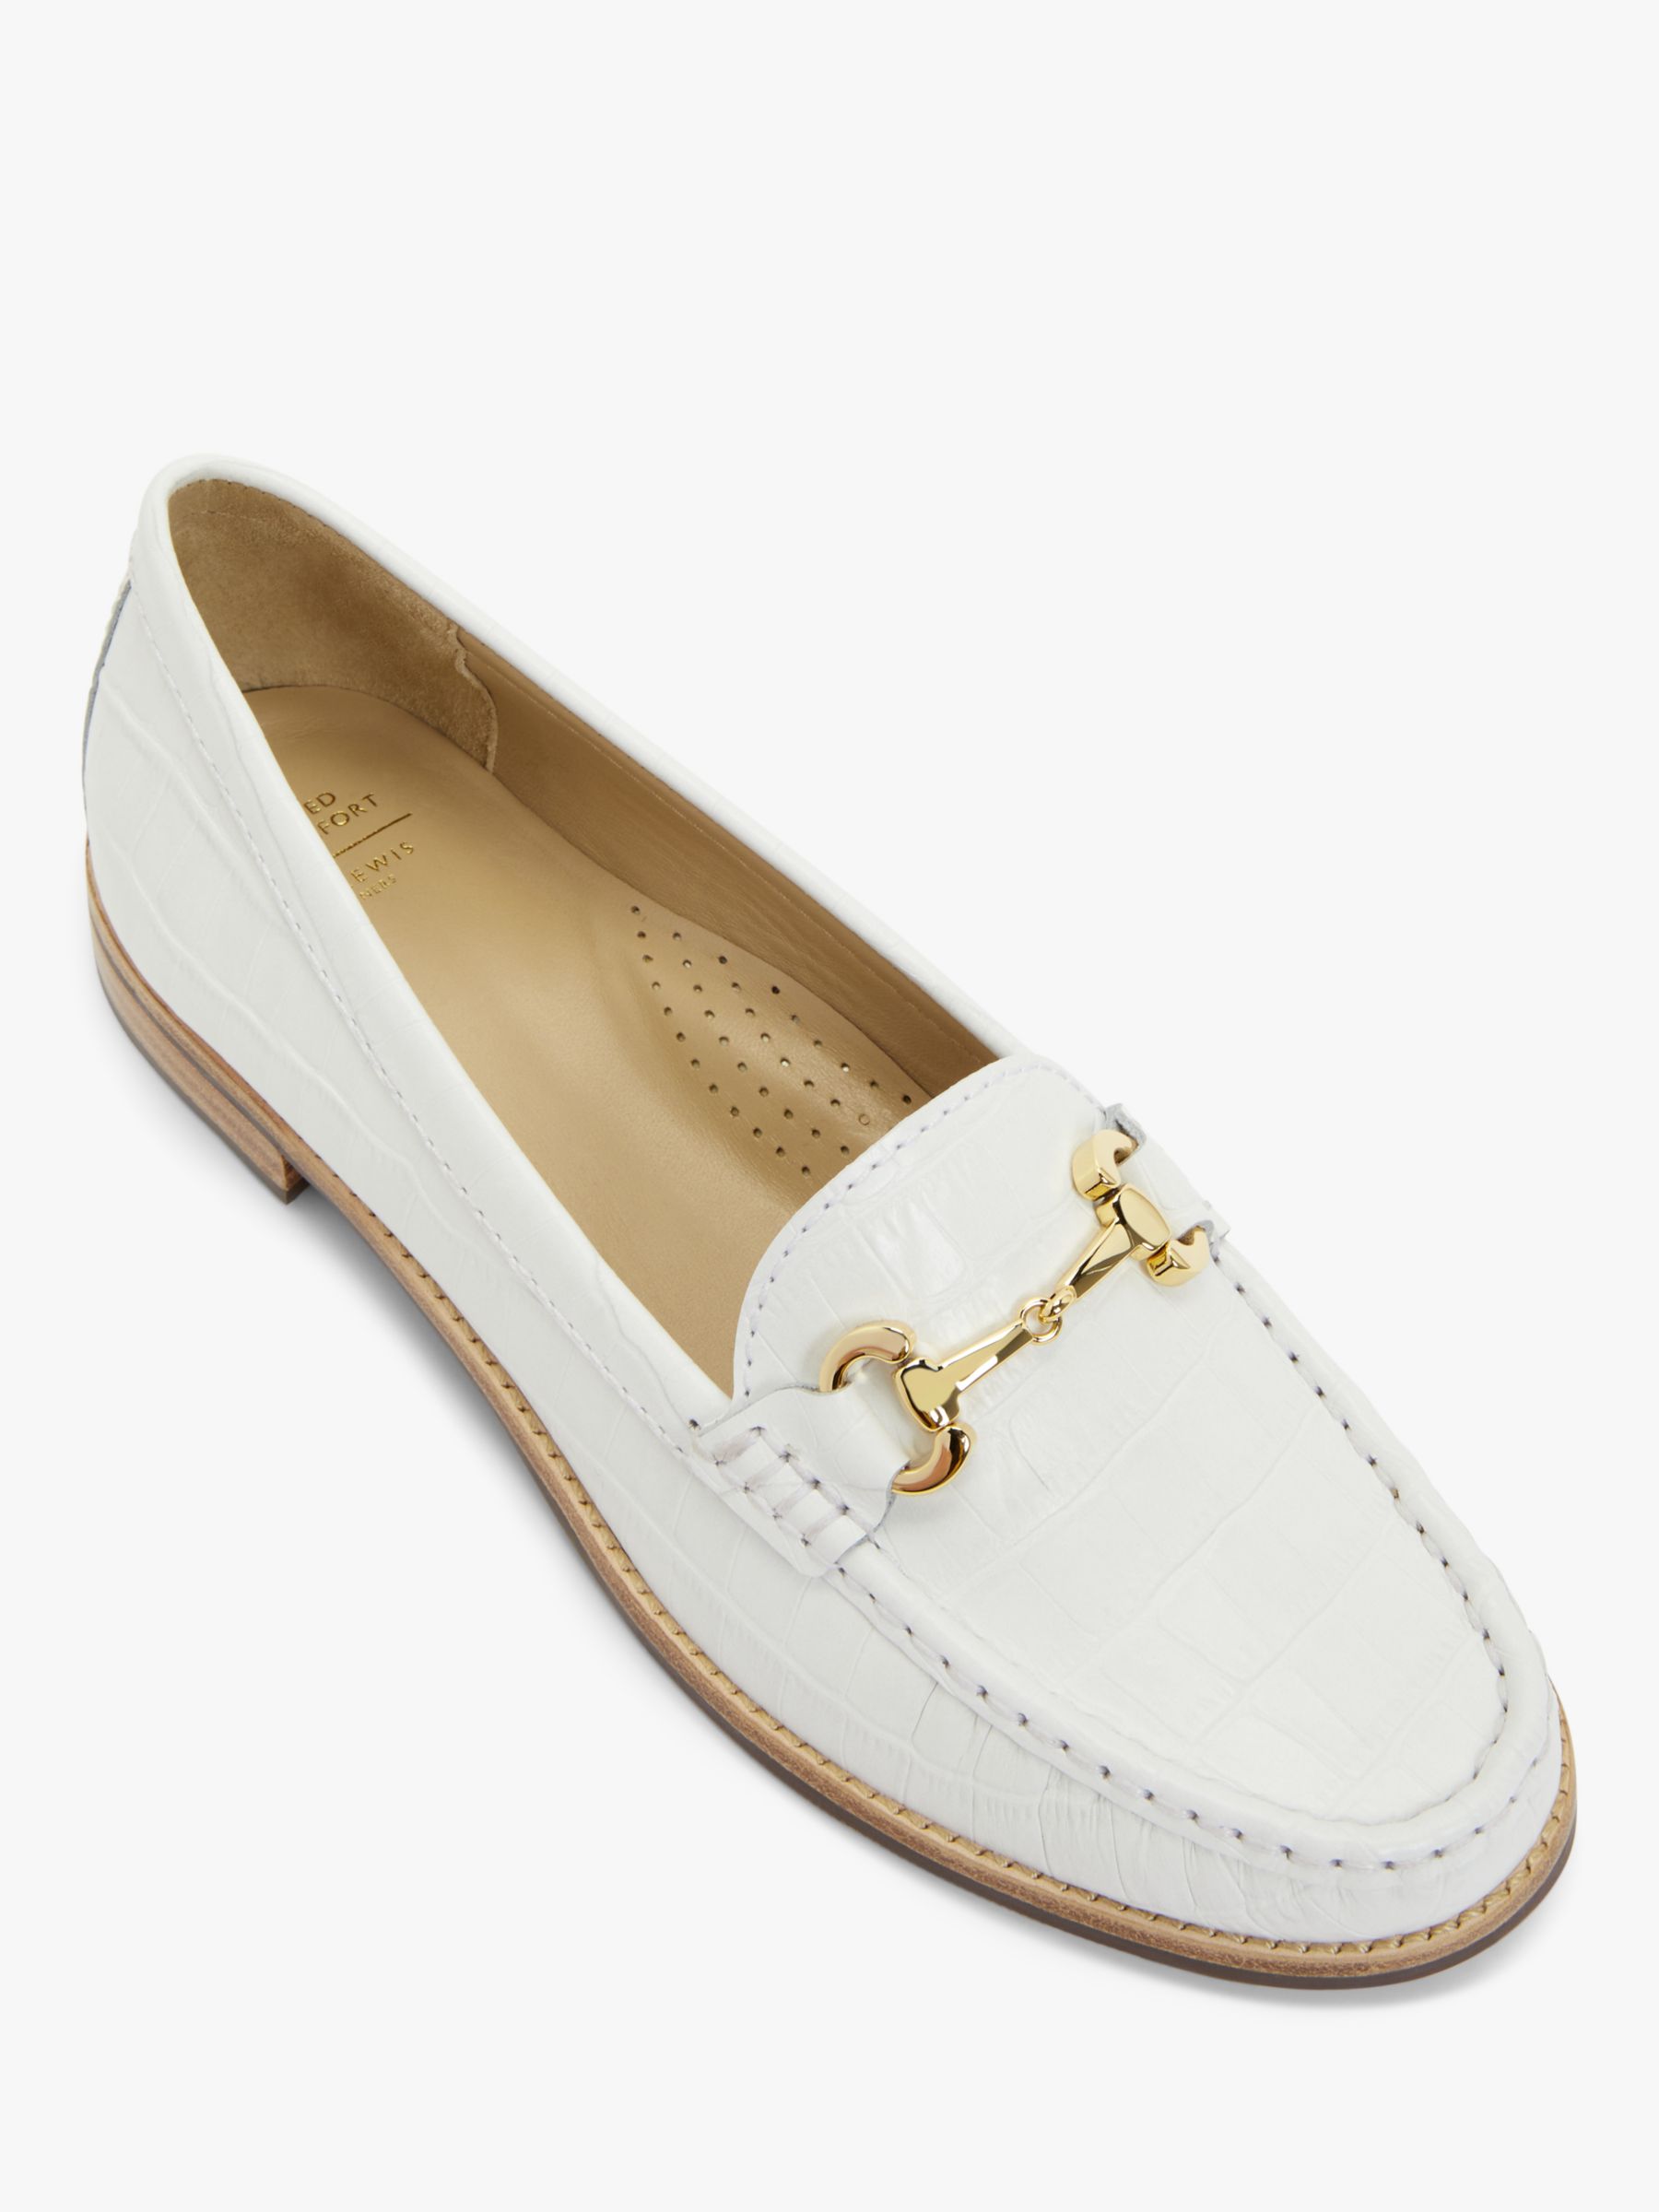 John Lewis August Leather Moccasins, White Croc, 3